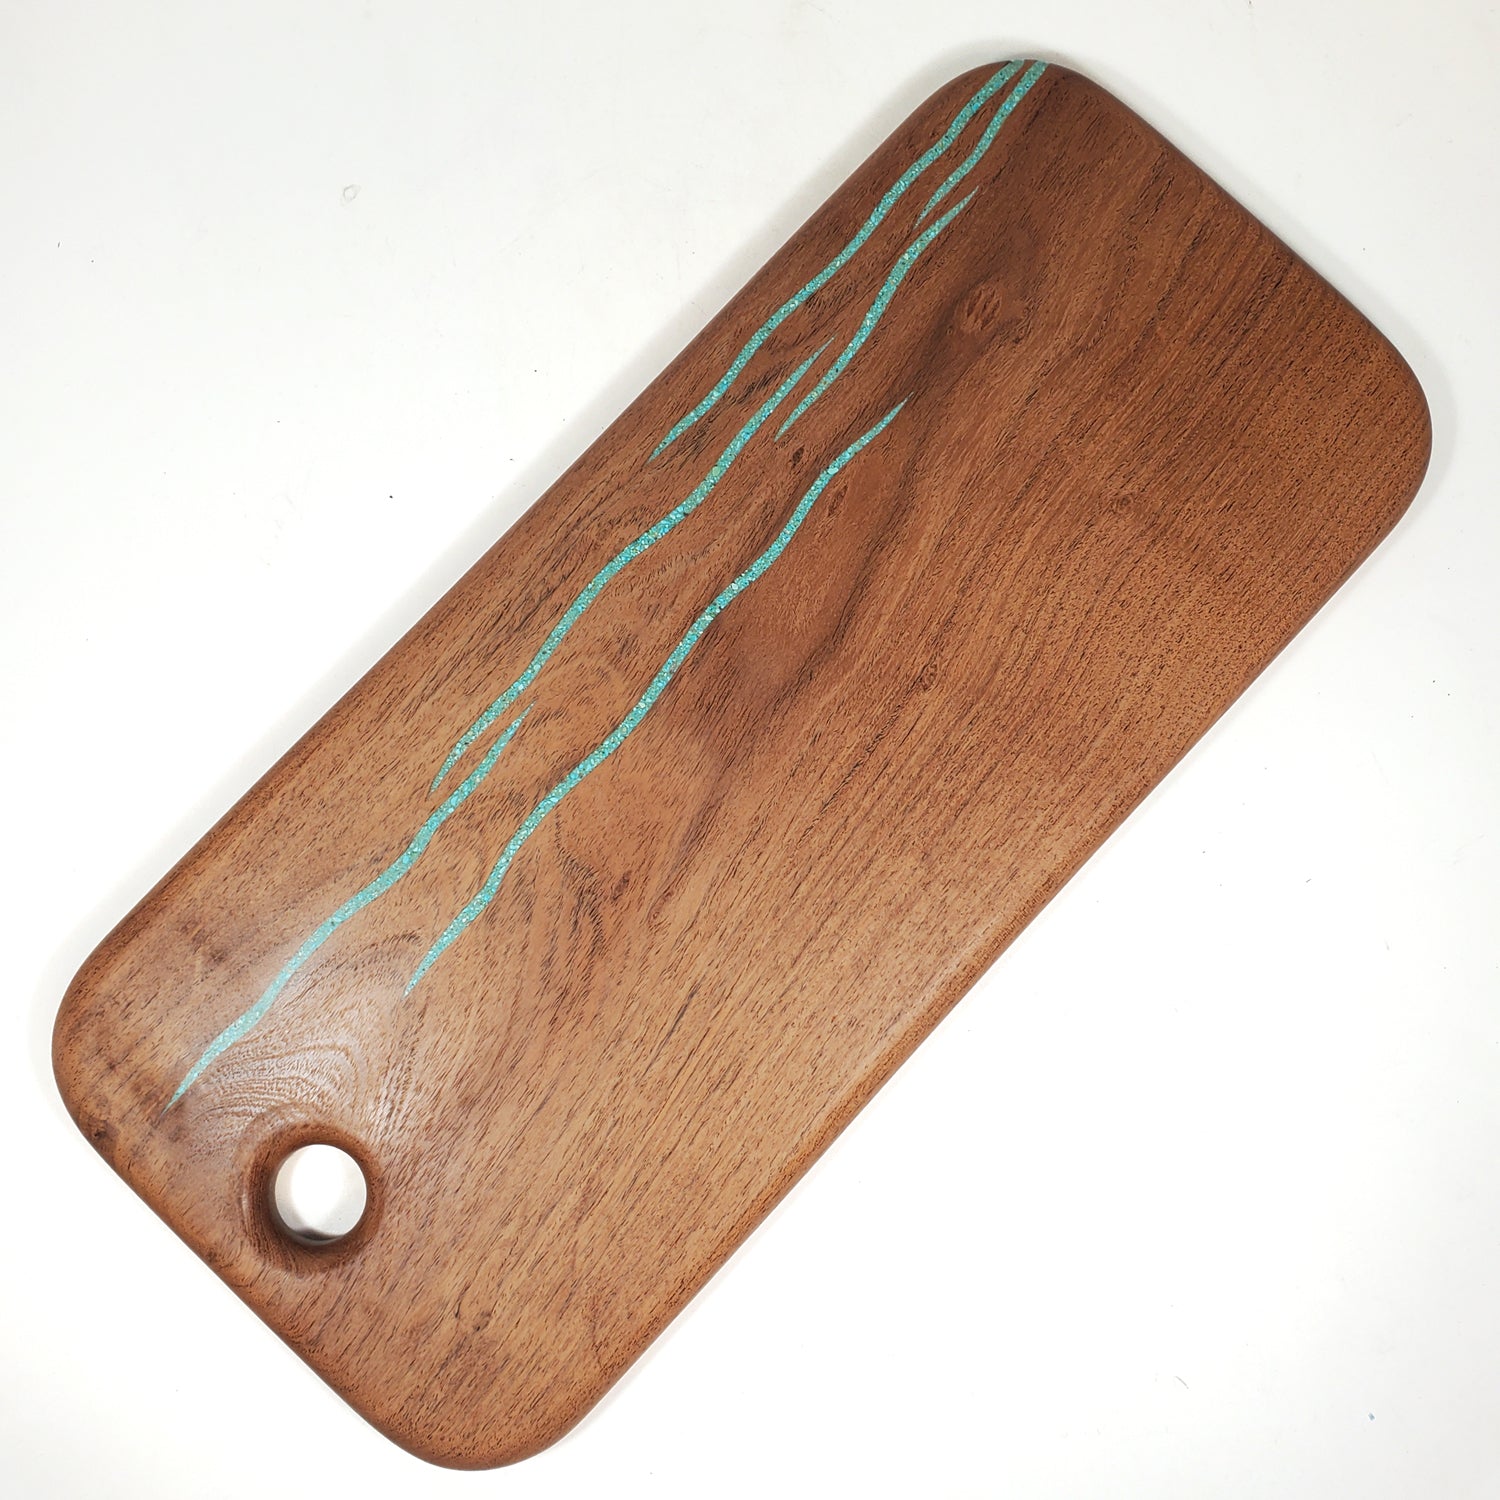 Mesquite Bread Board with Turquoise Inlay